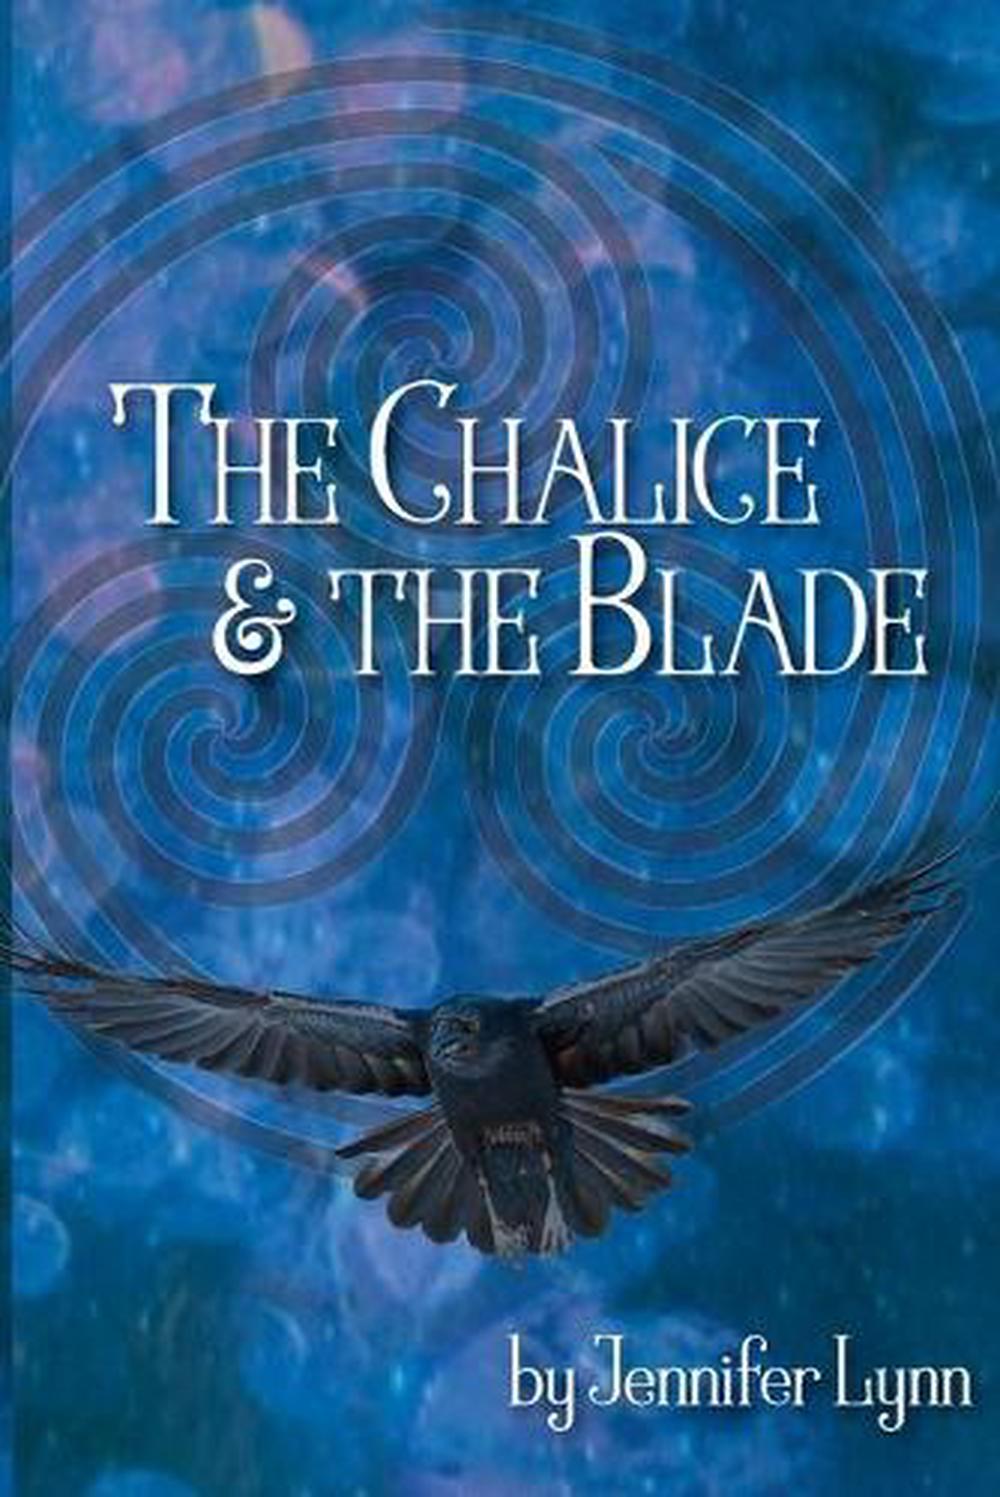 book the chalice and the blade